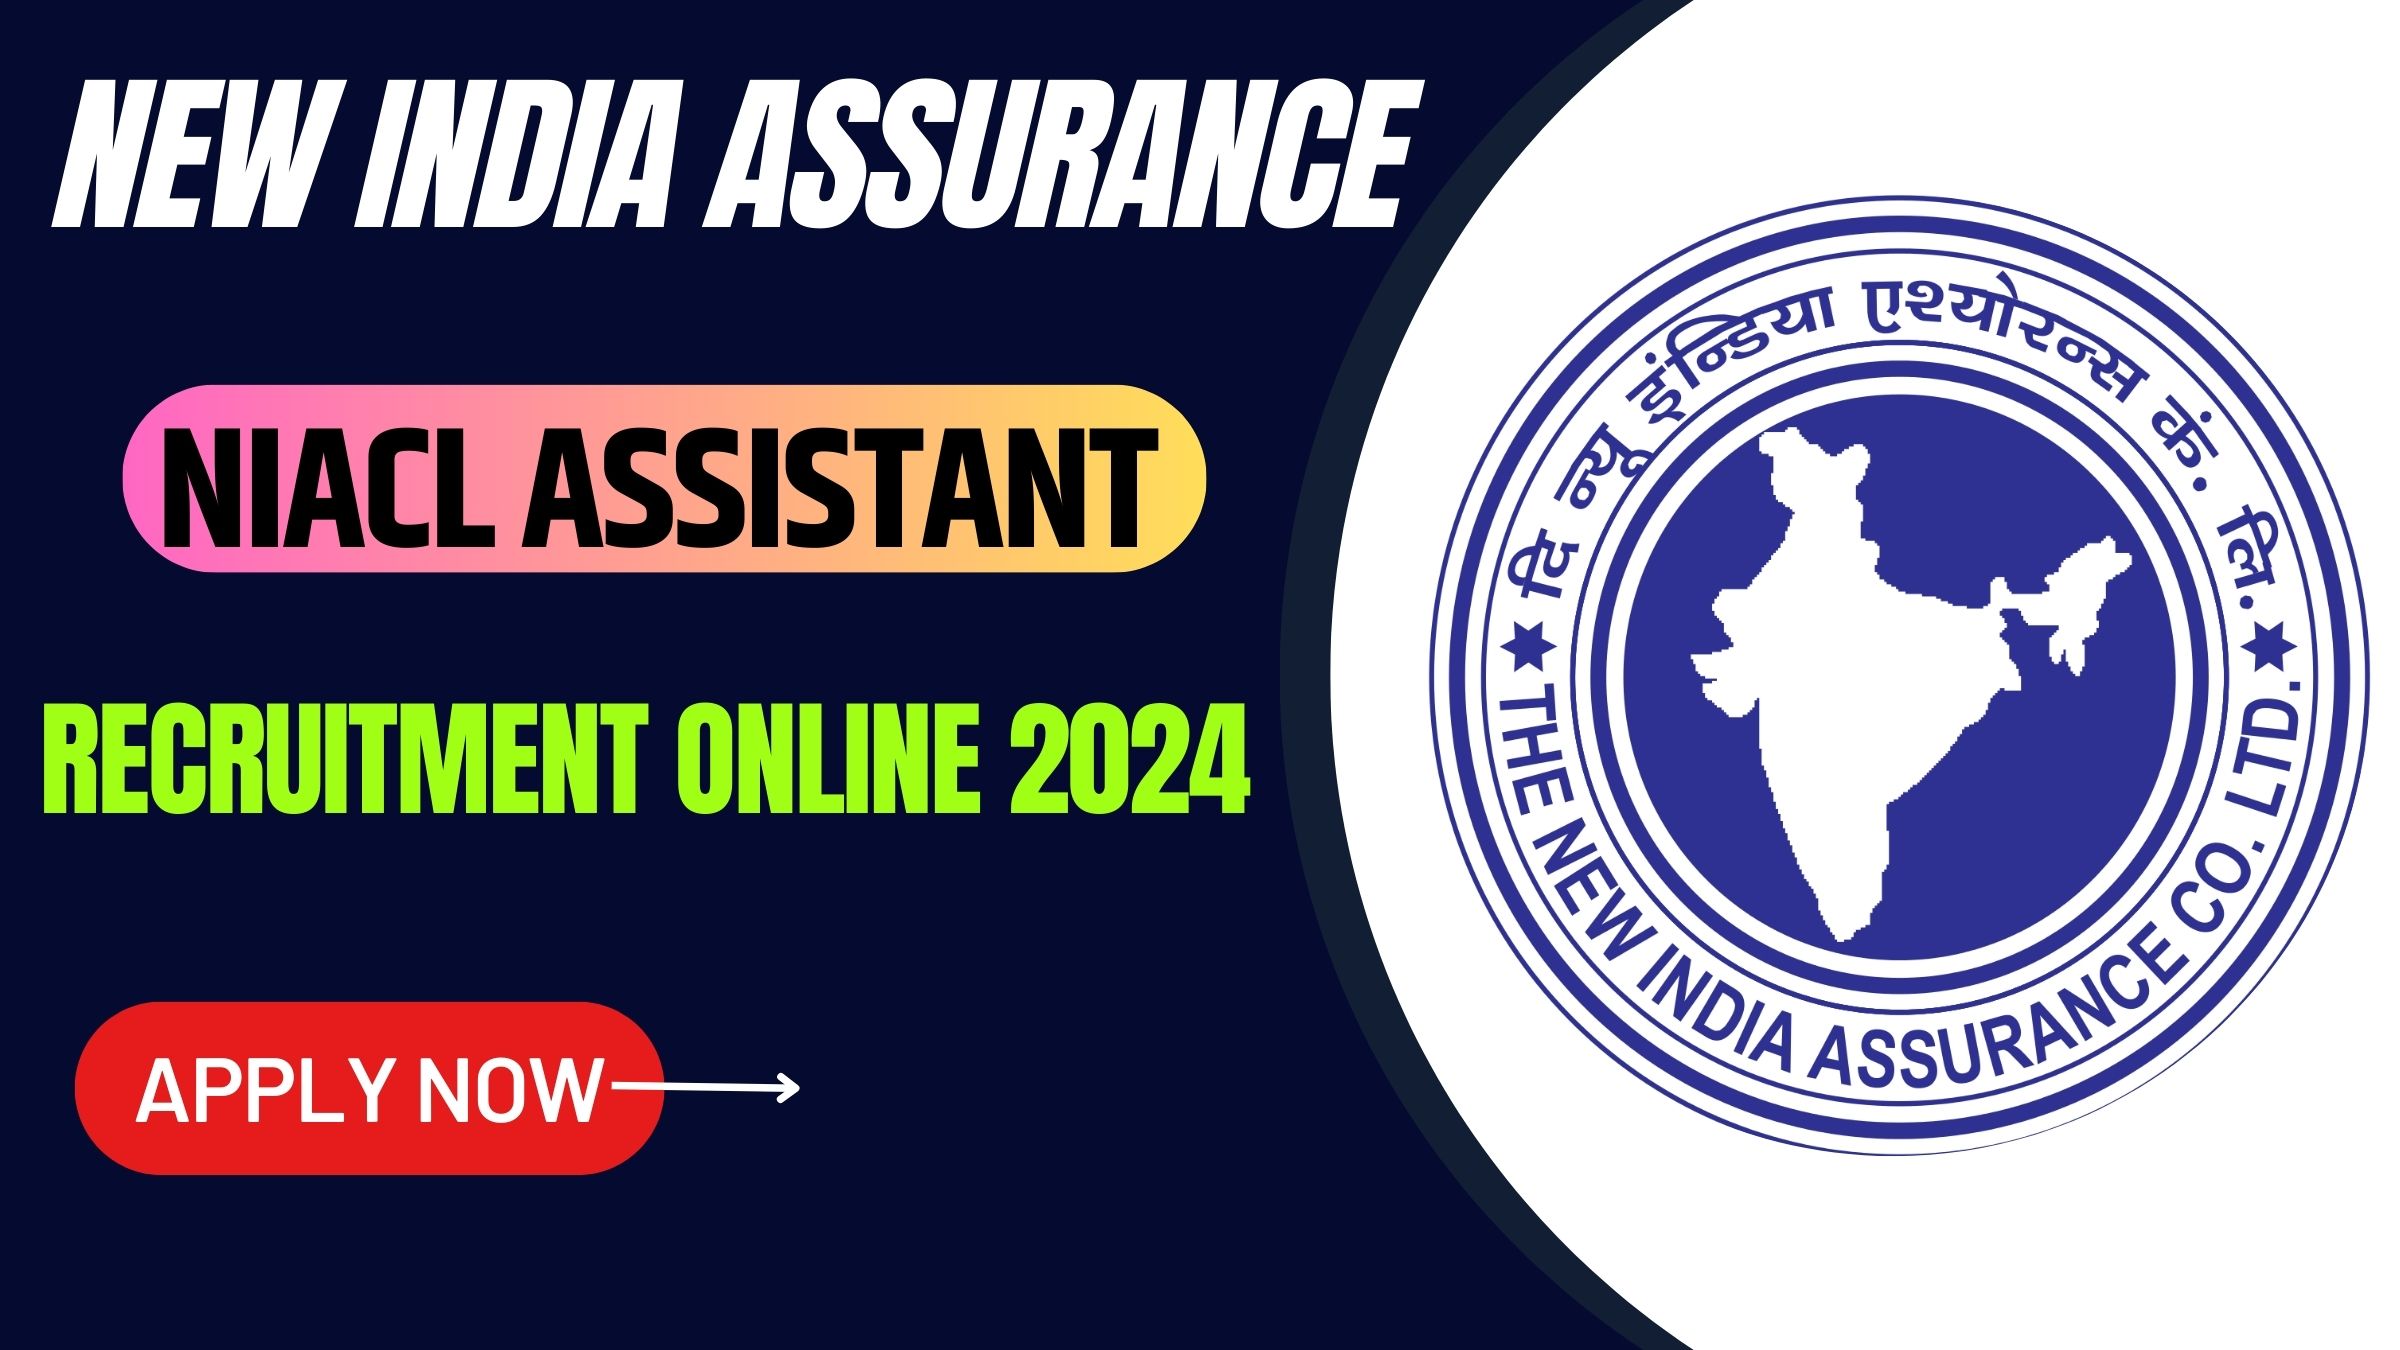 New India Assurance NIACL Assistant Apply Online 2024 SBJ HUB JOBS